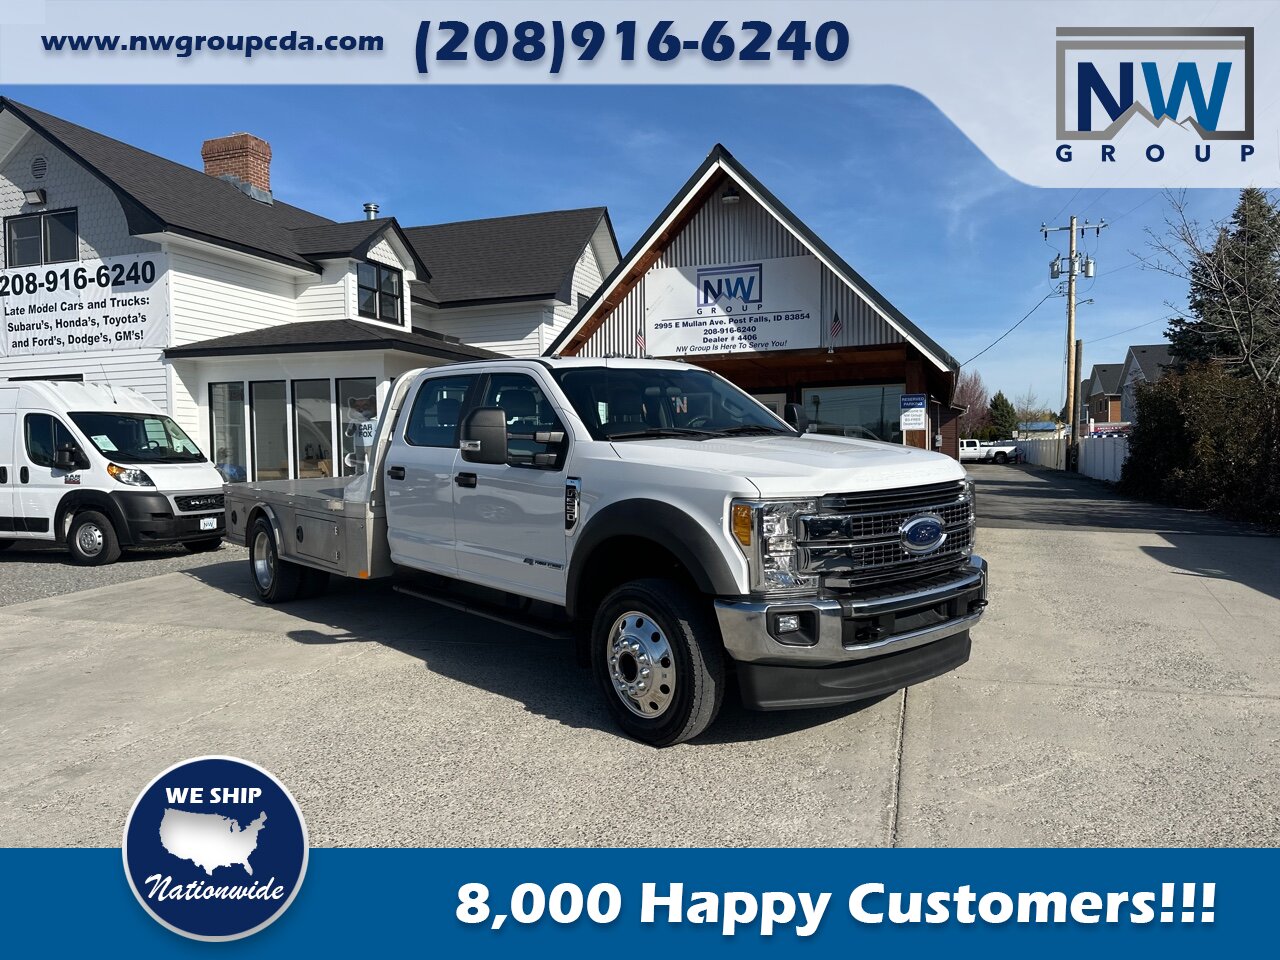 2020 Ford Commercial F-550 Super Duty F550 Chassis & Crew Cab  11.5' CM Truck Beds Aluminum Flat Bed! Heavy Duty Pick Up! Amazing Build, Only 31k miles! - Photo 2 - Post Falls, ID 83854